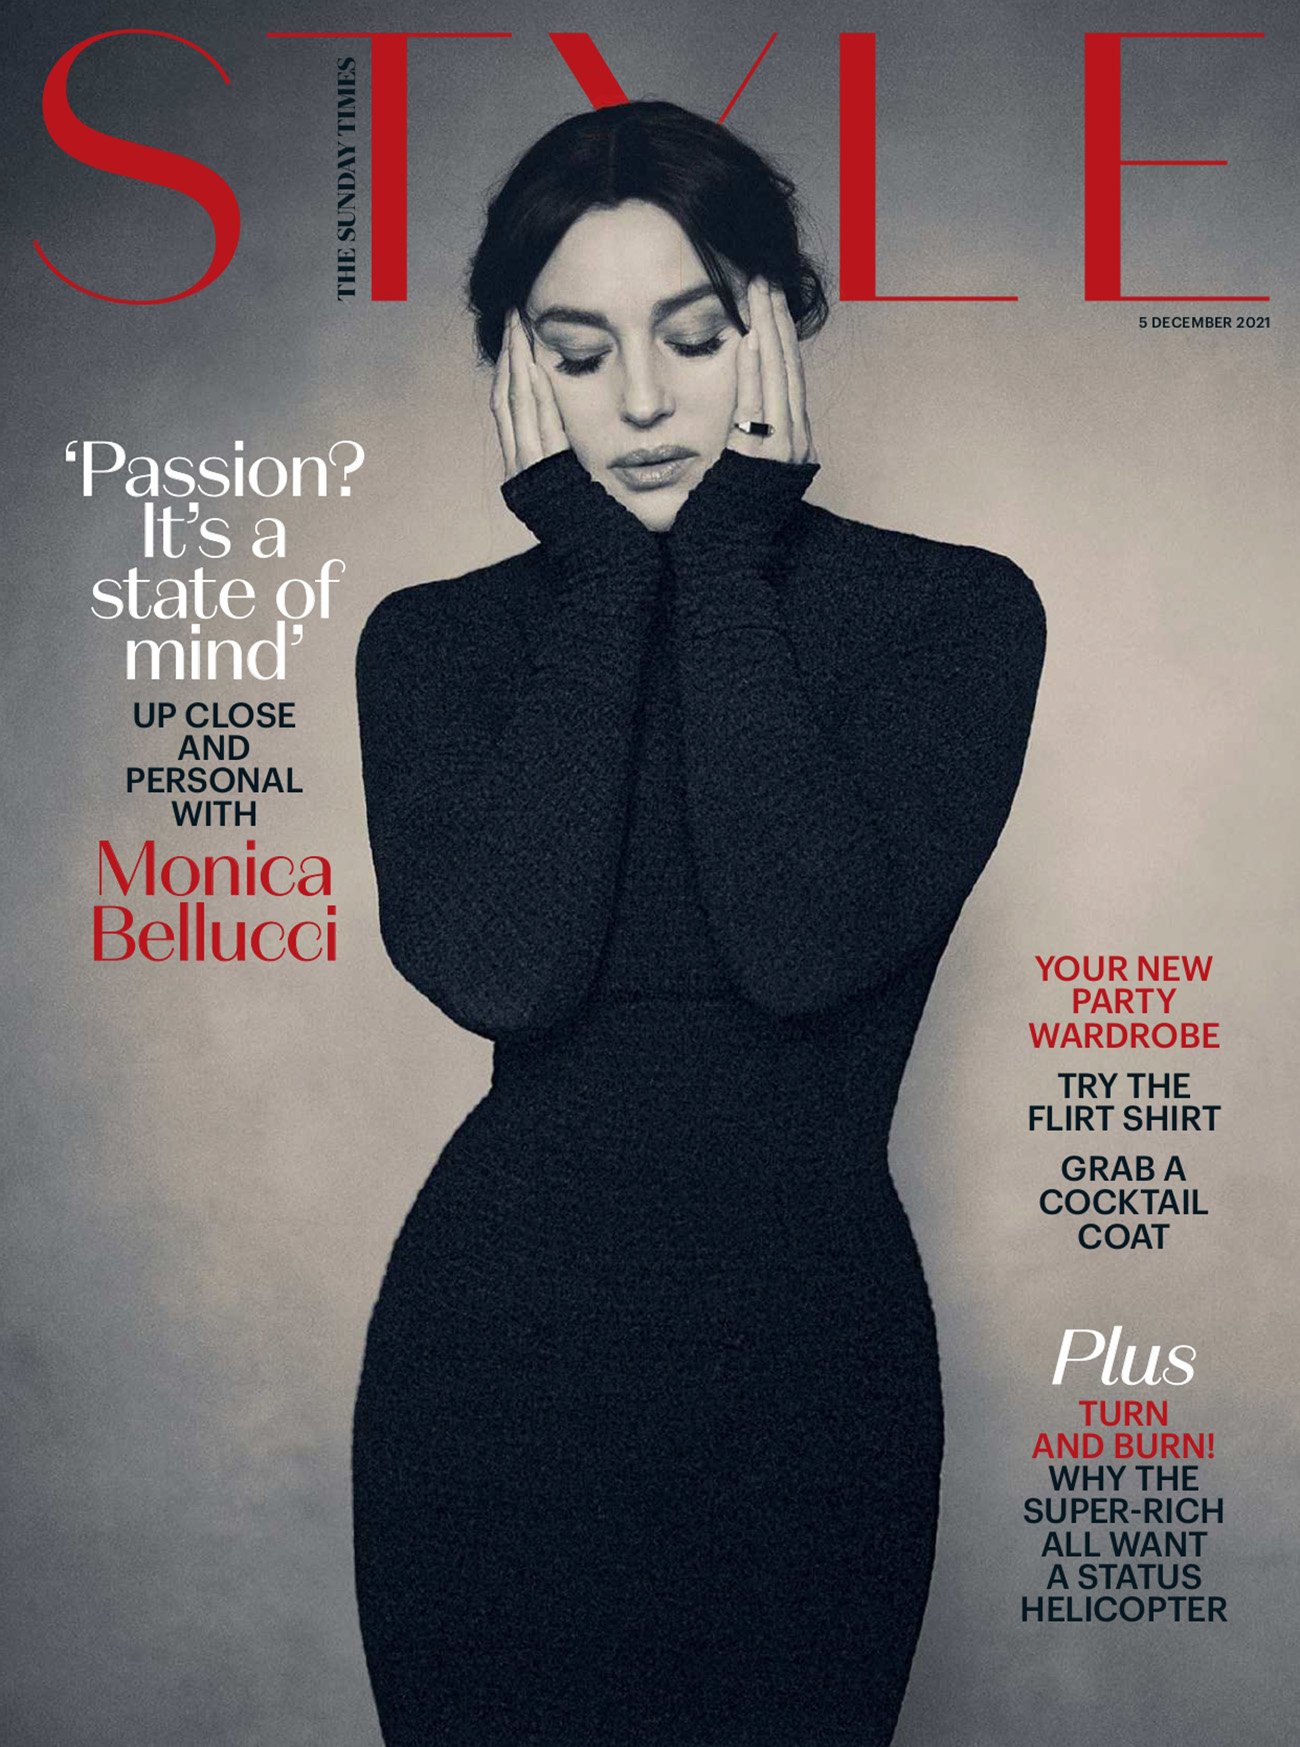 Monica-Bellucci-covers-The-Sunday-Times-Style-December-5th-2021-by-Sonia-Szostak-1.jpg